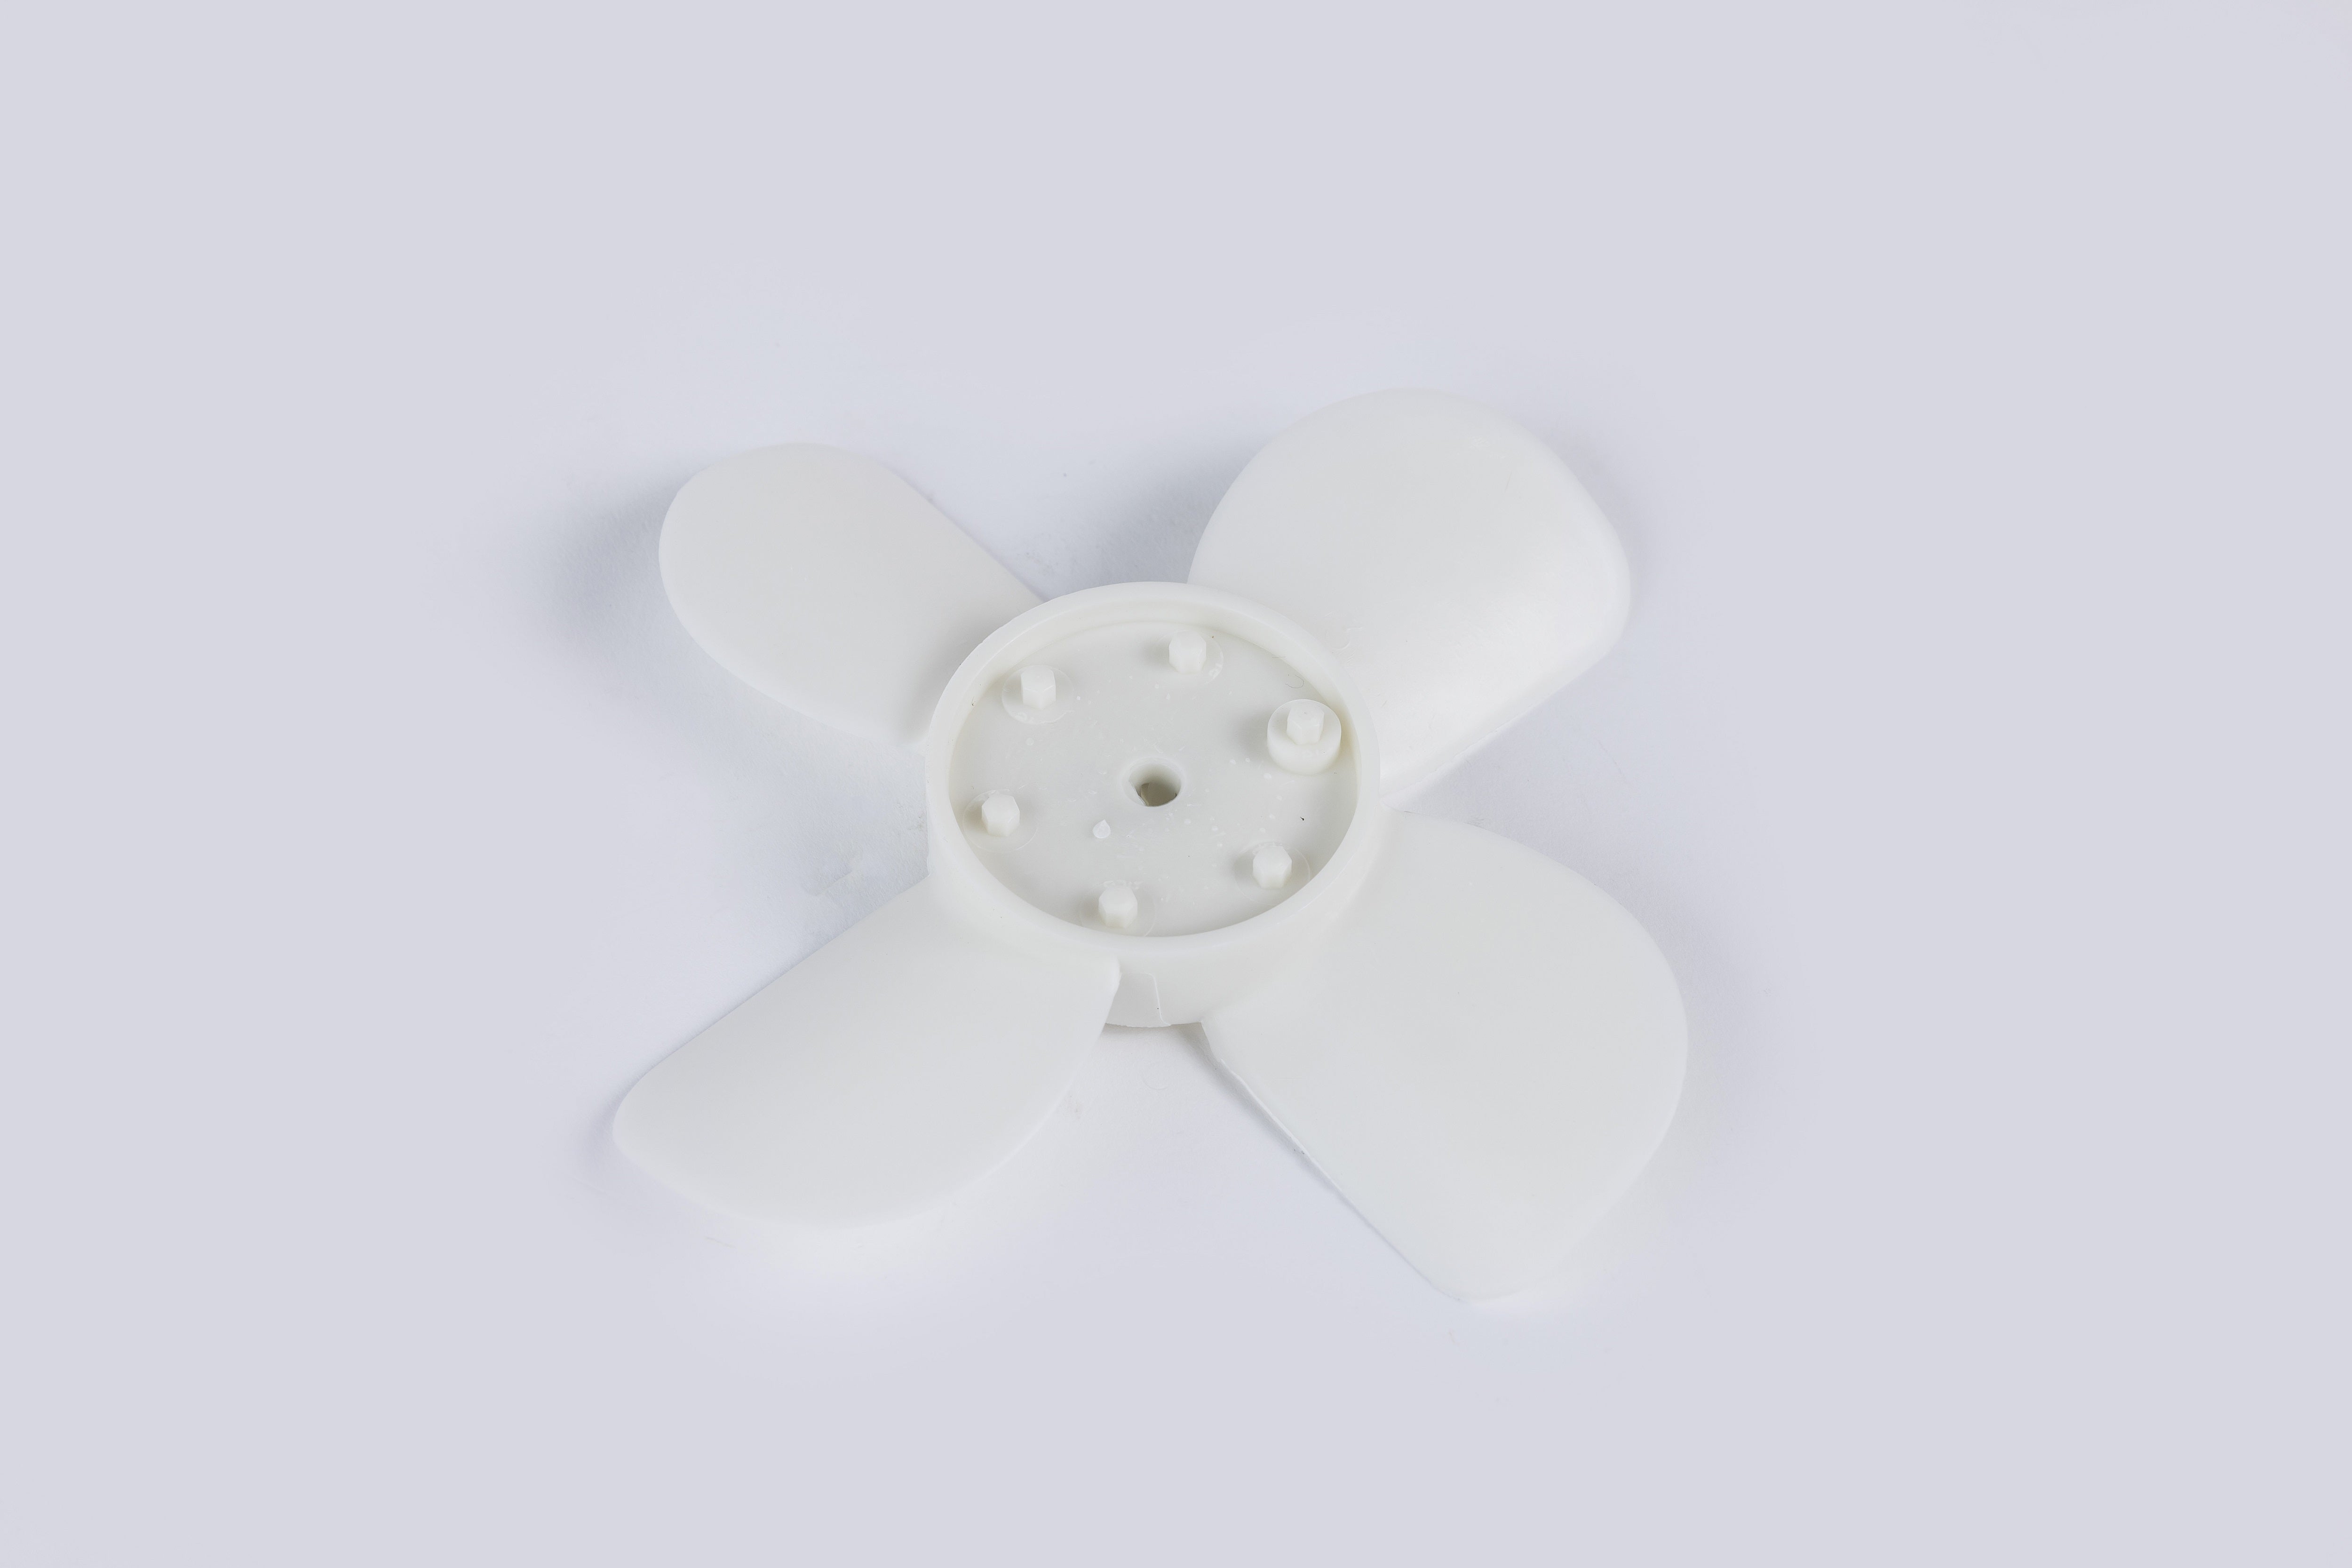 Fan 4 Blade For Red Dot R-254 R-255 Units 73R8050 Air Movement